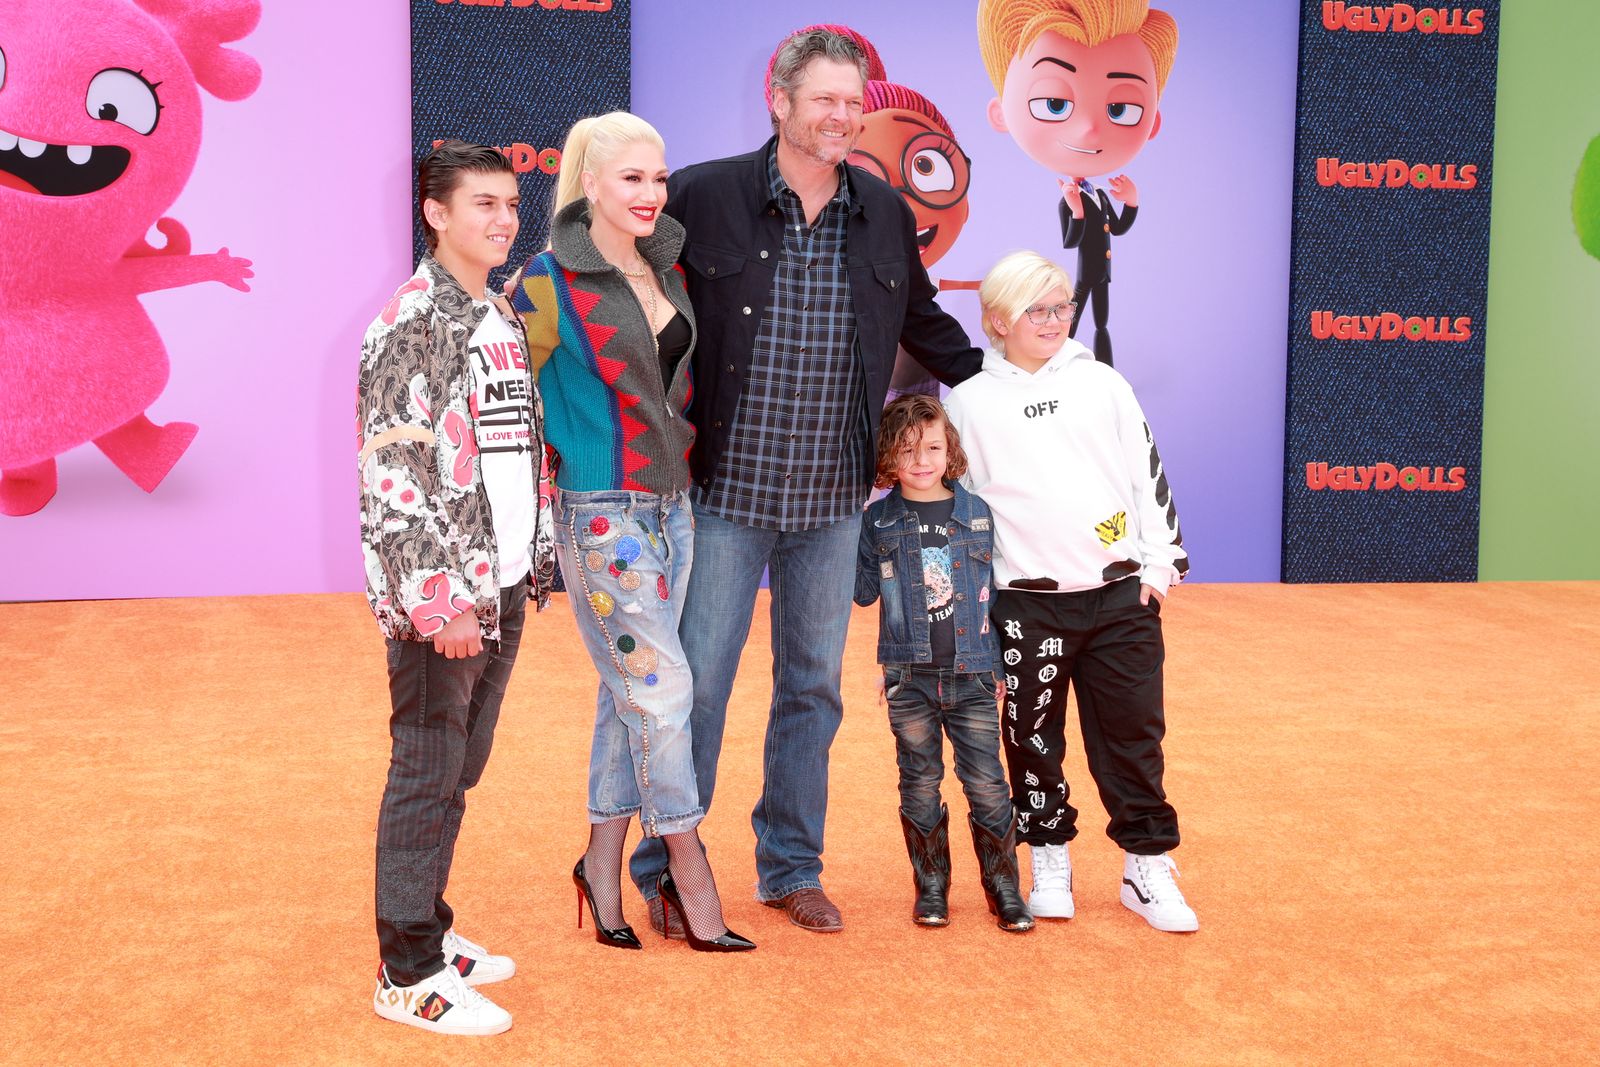 Kingston Rossdale, Gwen Stefani, Blake Shelton, Apollo Bowie Flynn Rossdale, and Zuma Nesta Rock Rossdale at the World Premiere of "UglyDolls" on April 27, 2019, in Los Angeles, California. | Source: Getty Images